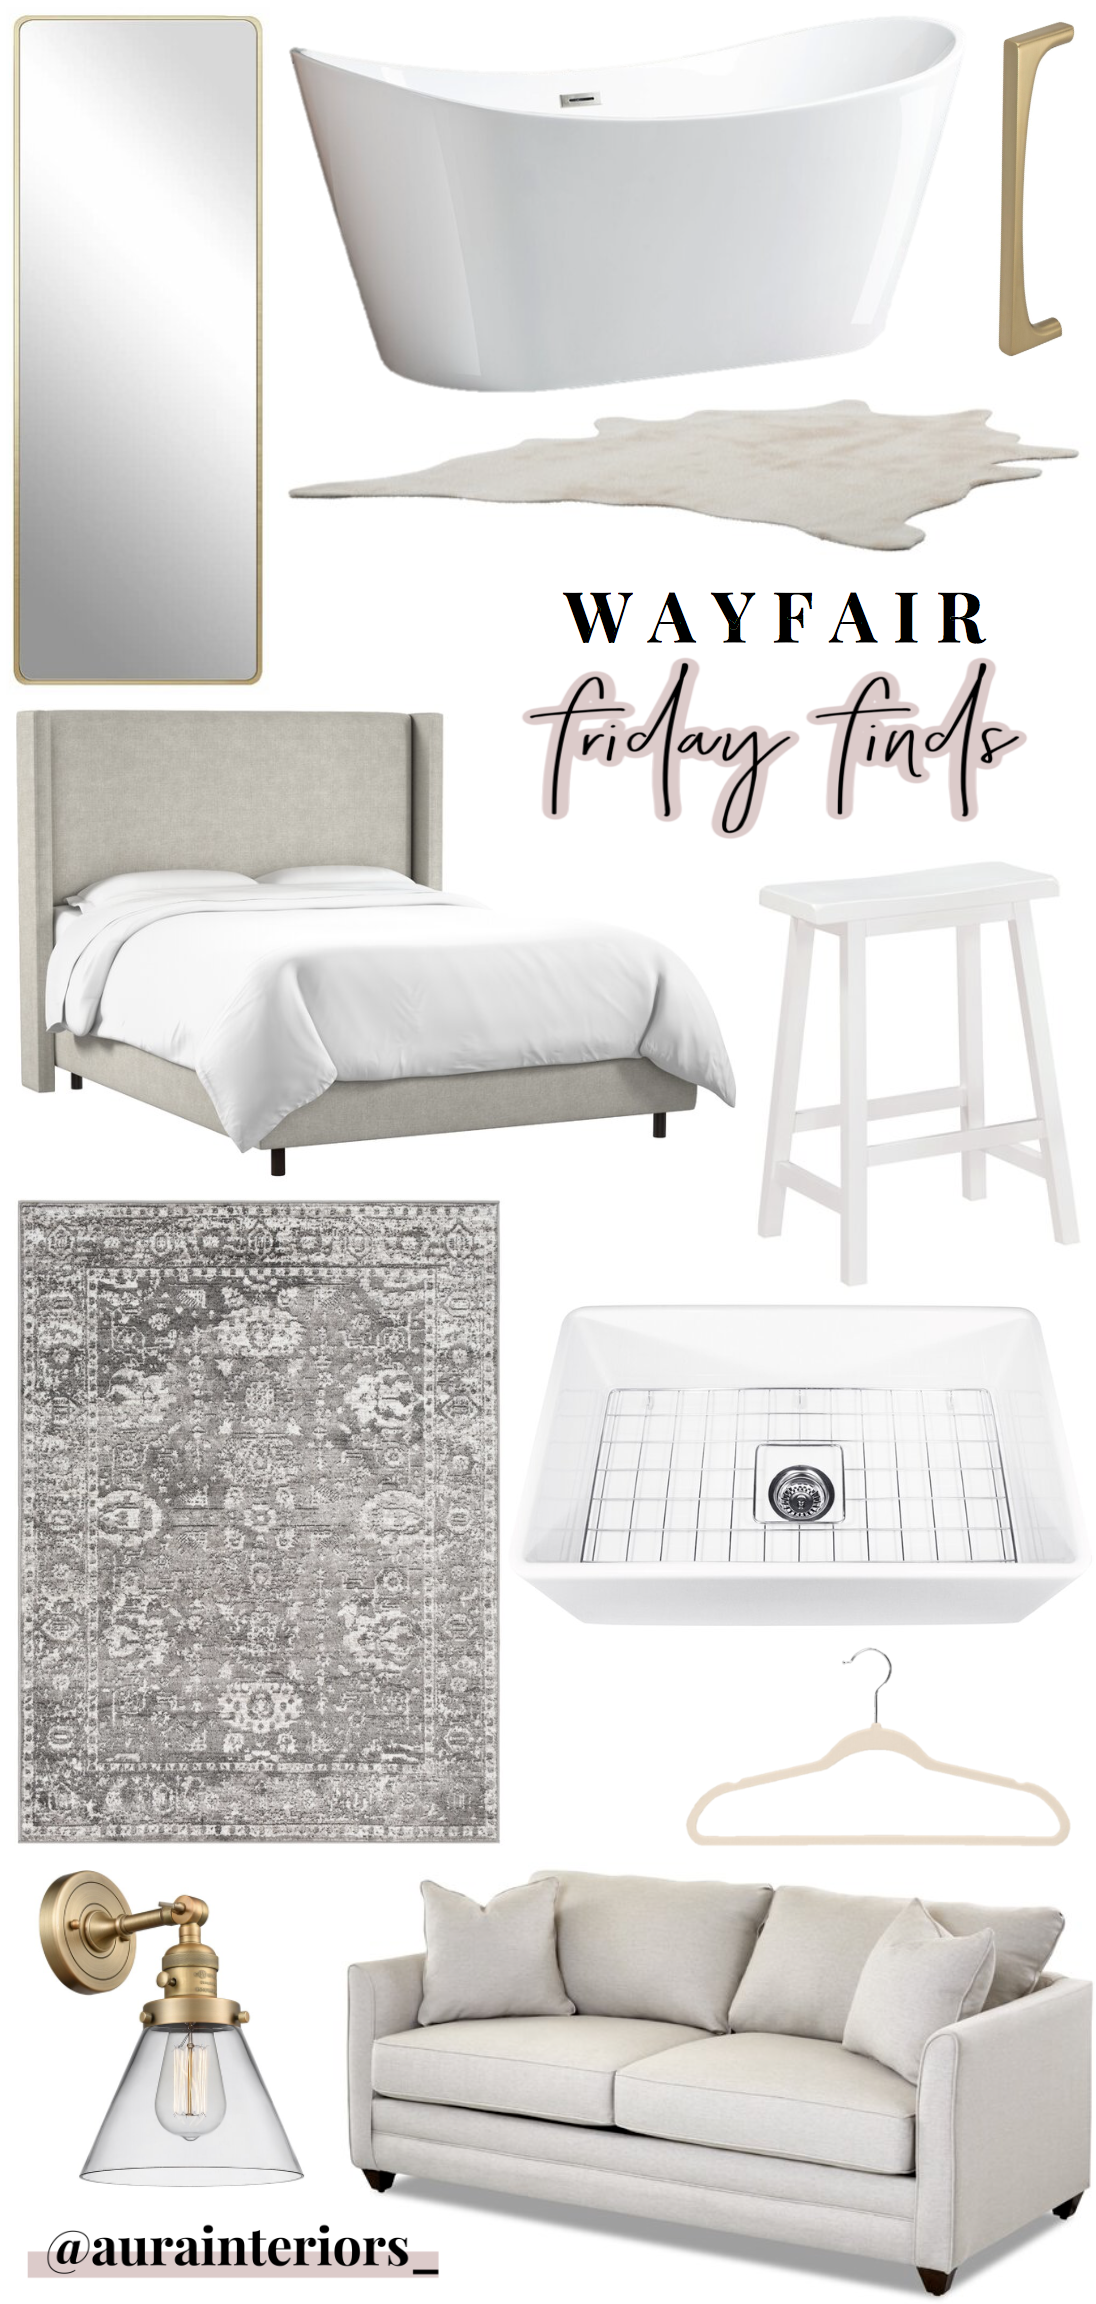 neutral wayfair home decor, wingback bed, tall upholstered bed, cheap farmers sink, pretty sleeper sofa, neutral bedroom decor, neutral living room decor, retro brass hardware